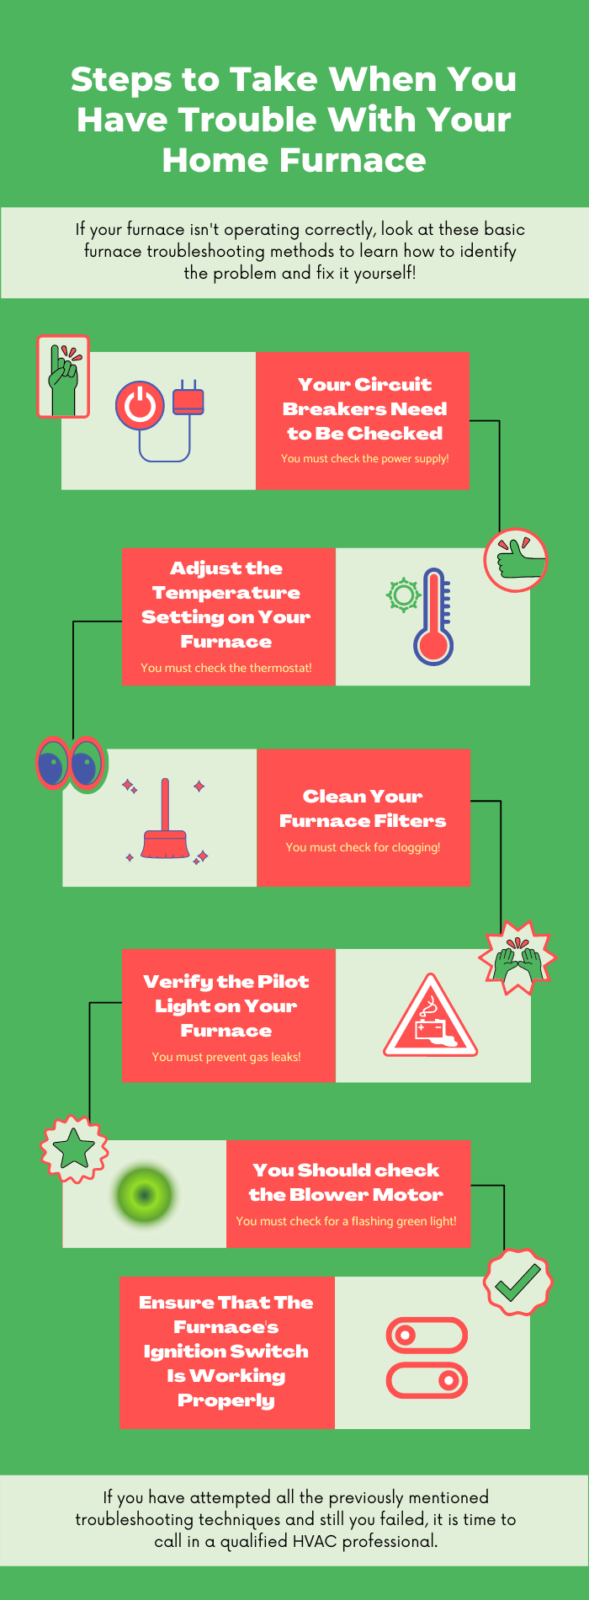 Steps to take when you have car troubles infographic.